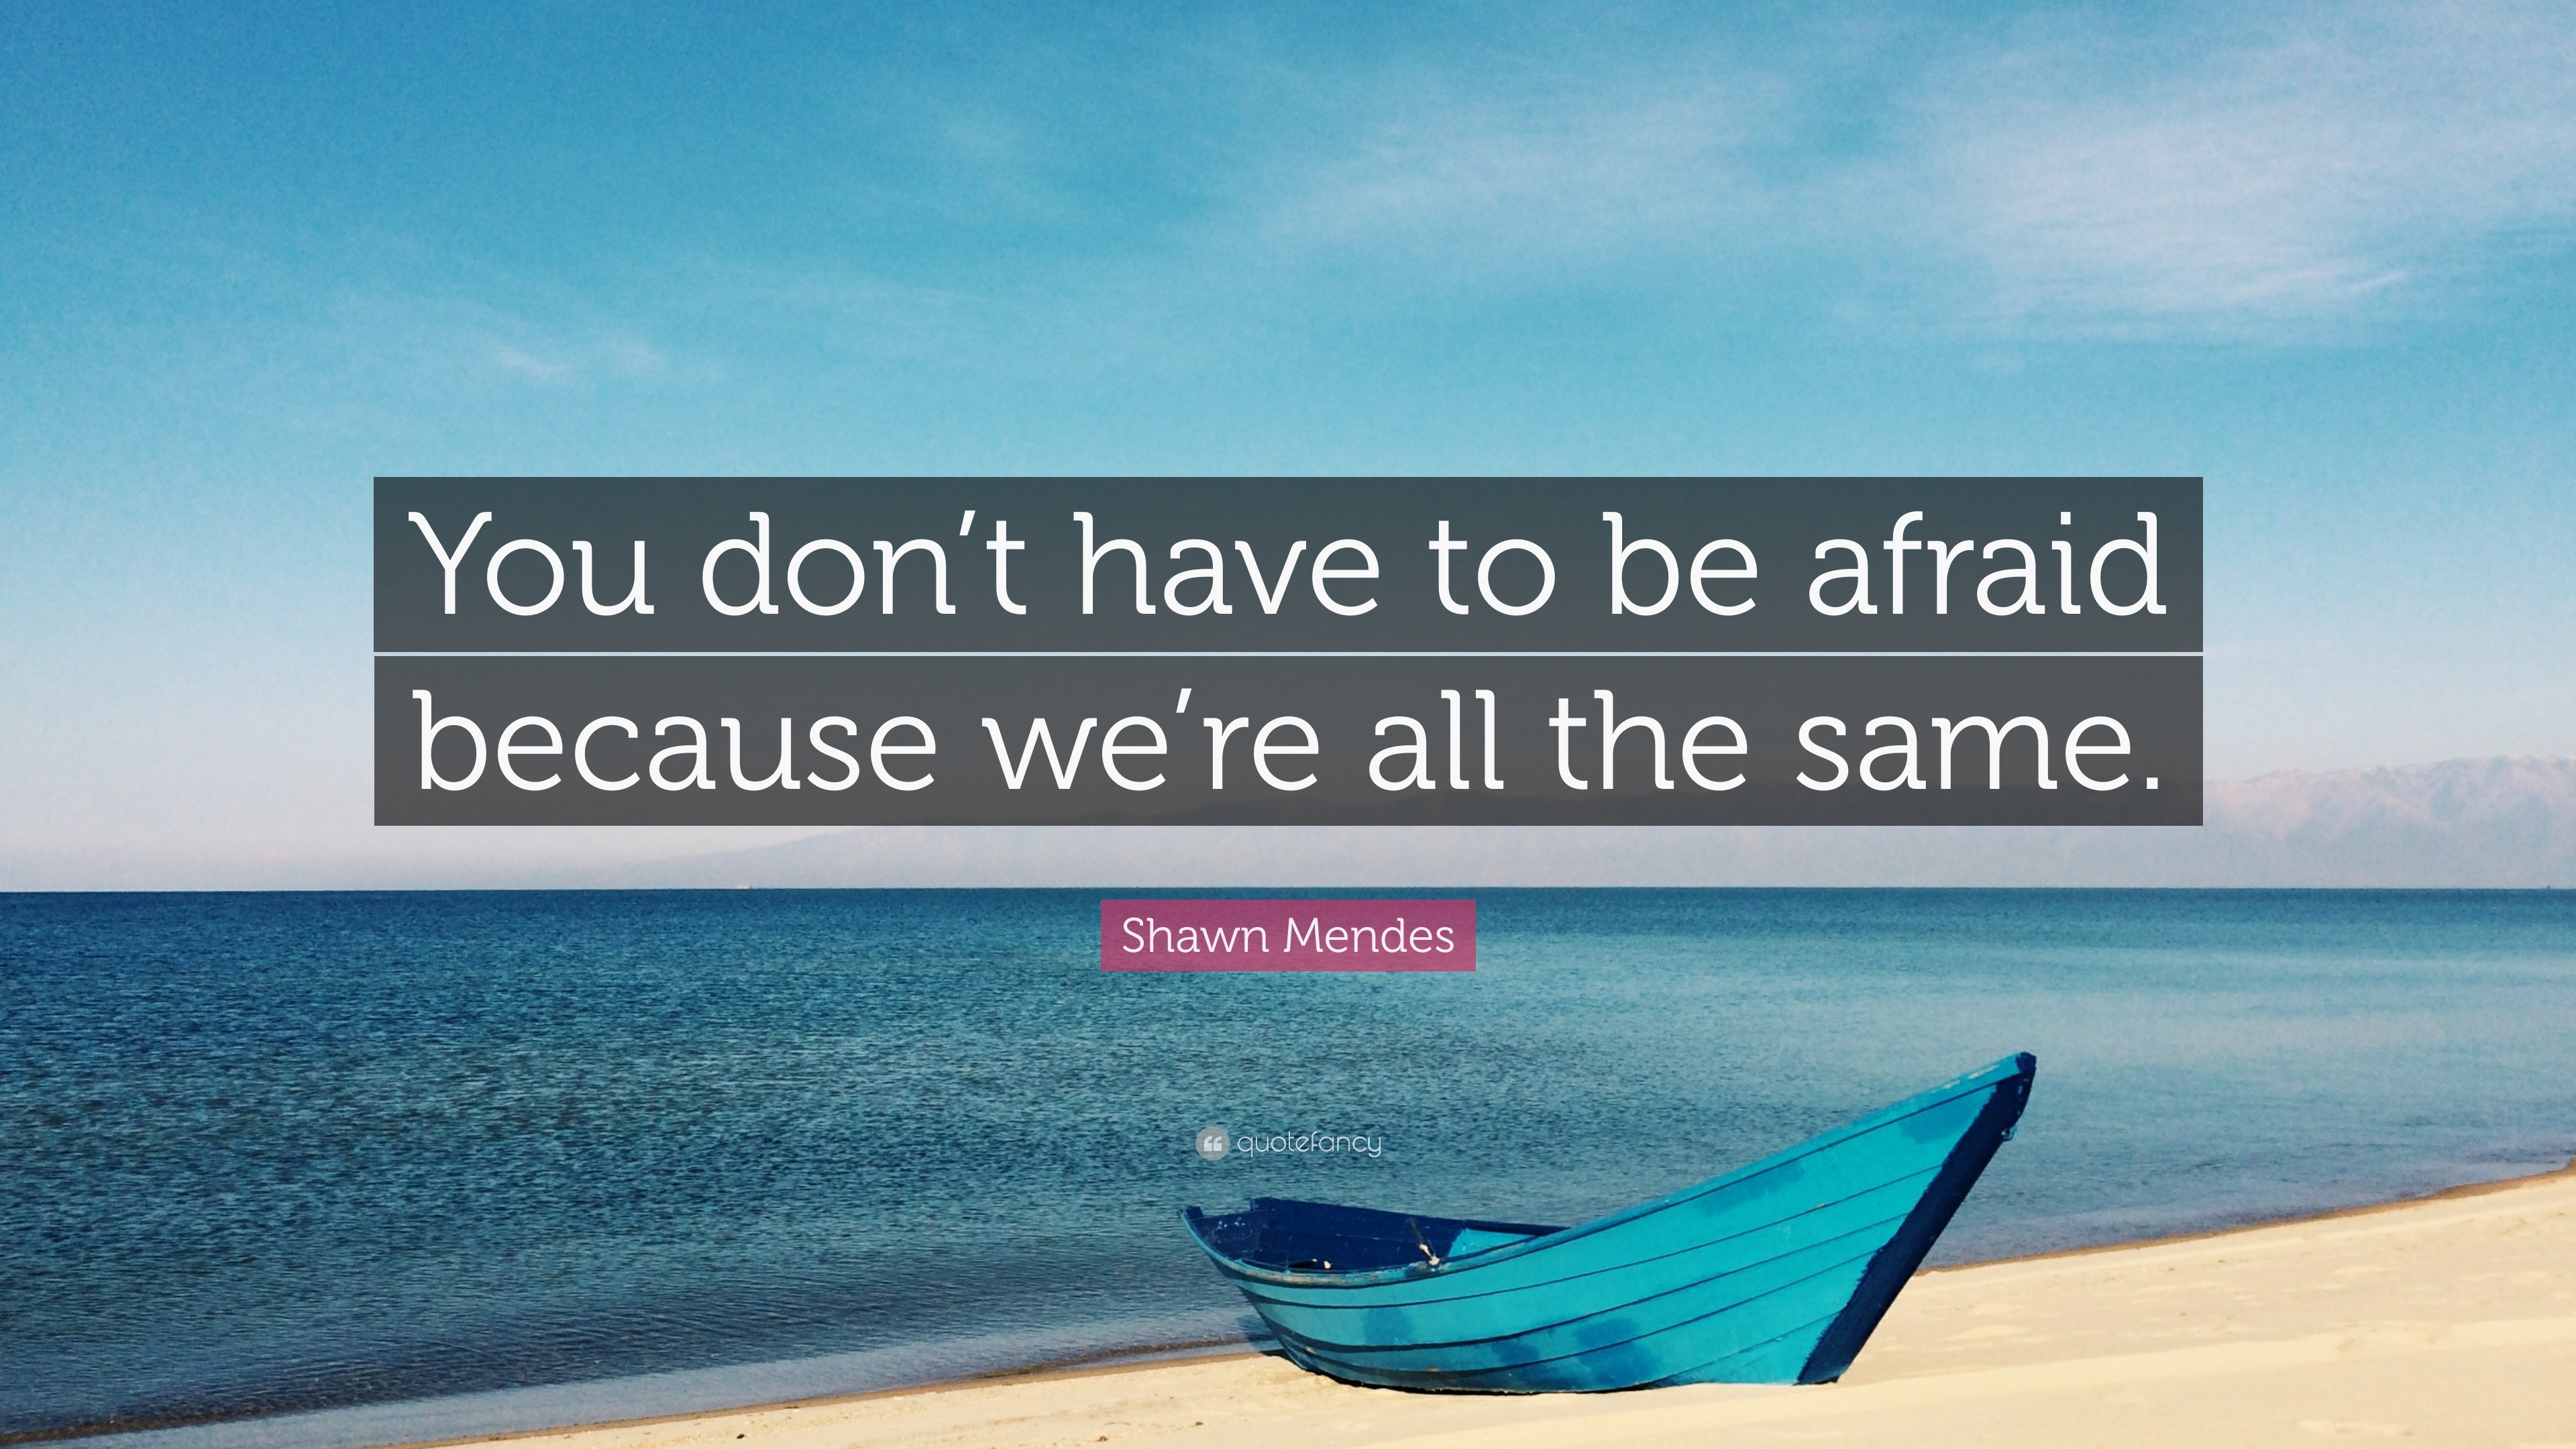 3840x2160 Shawn Mendes Quote: “You don't have to be afraid because we'